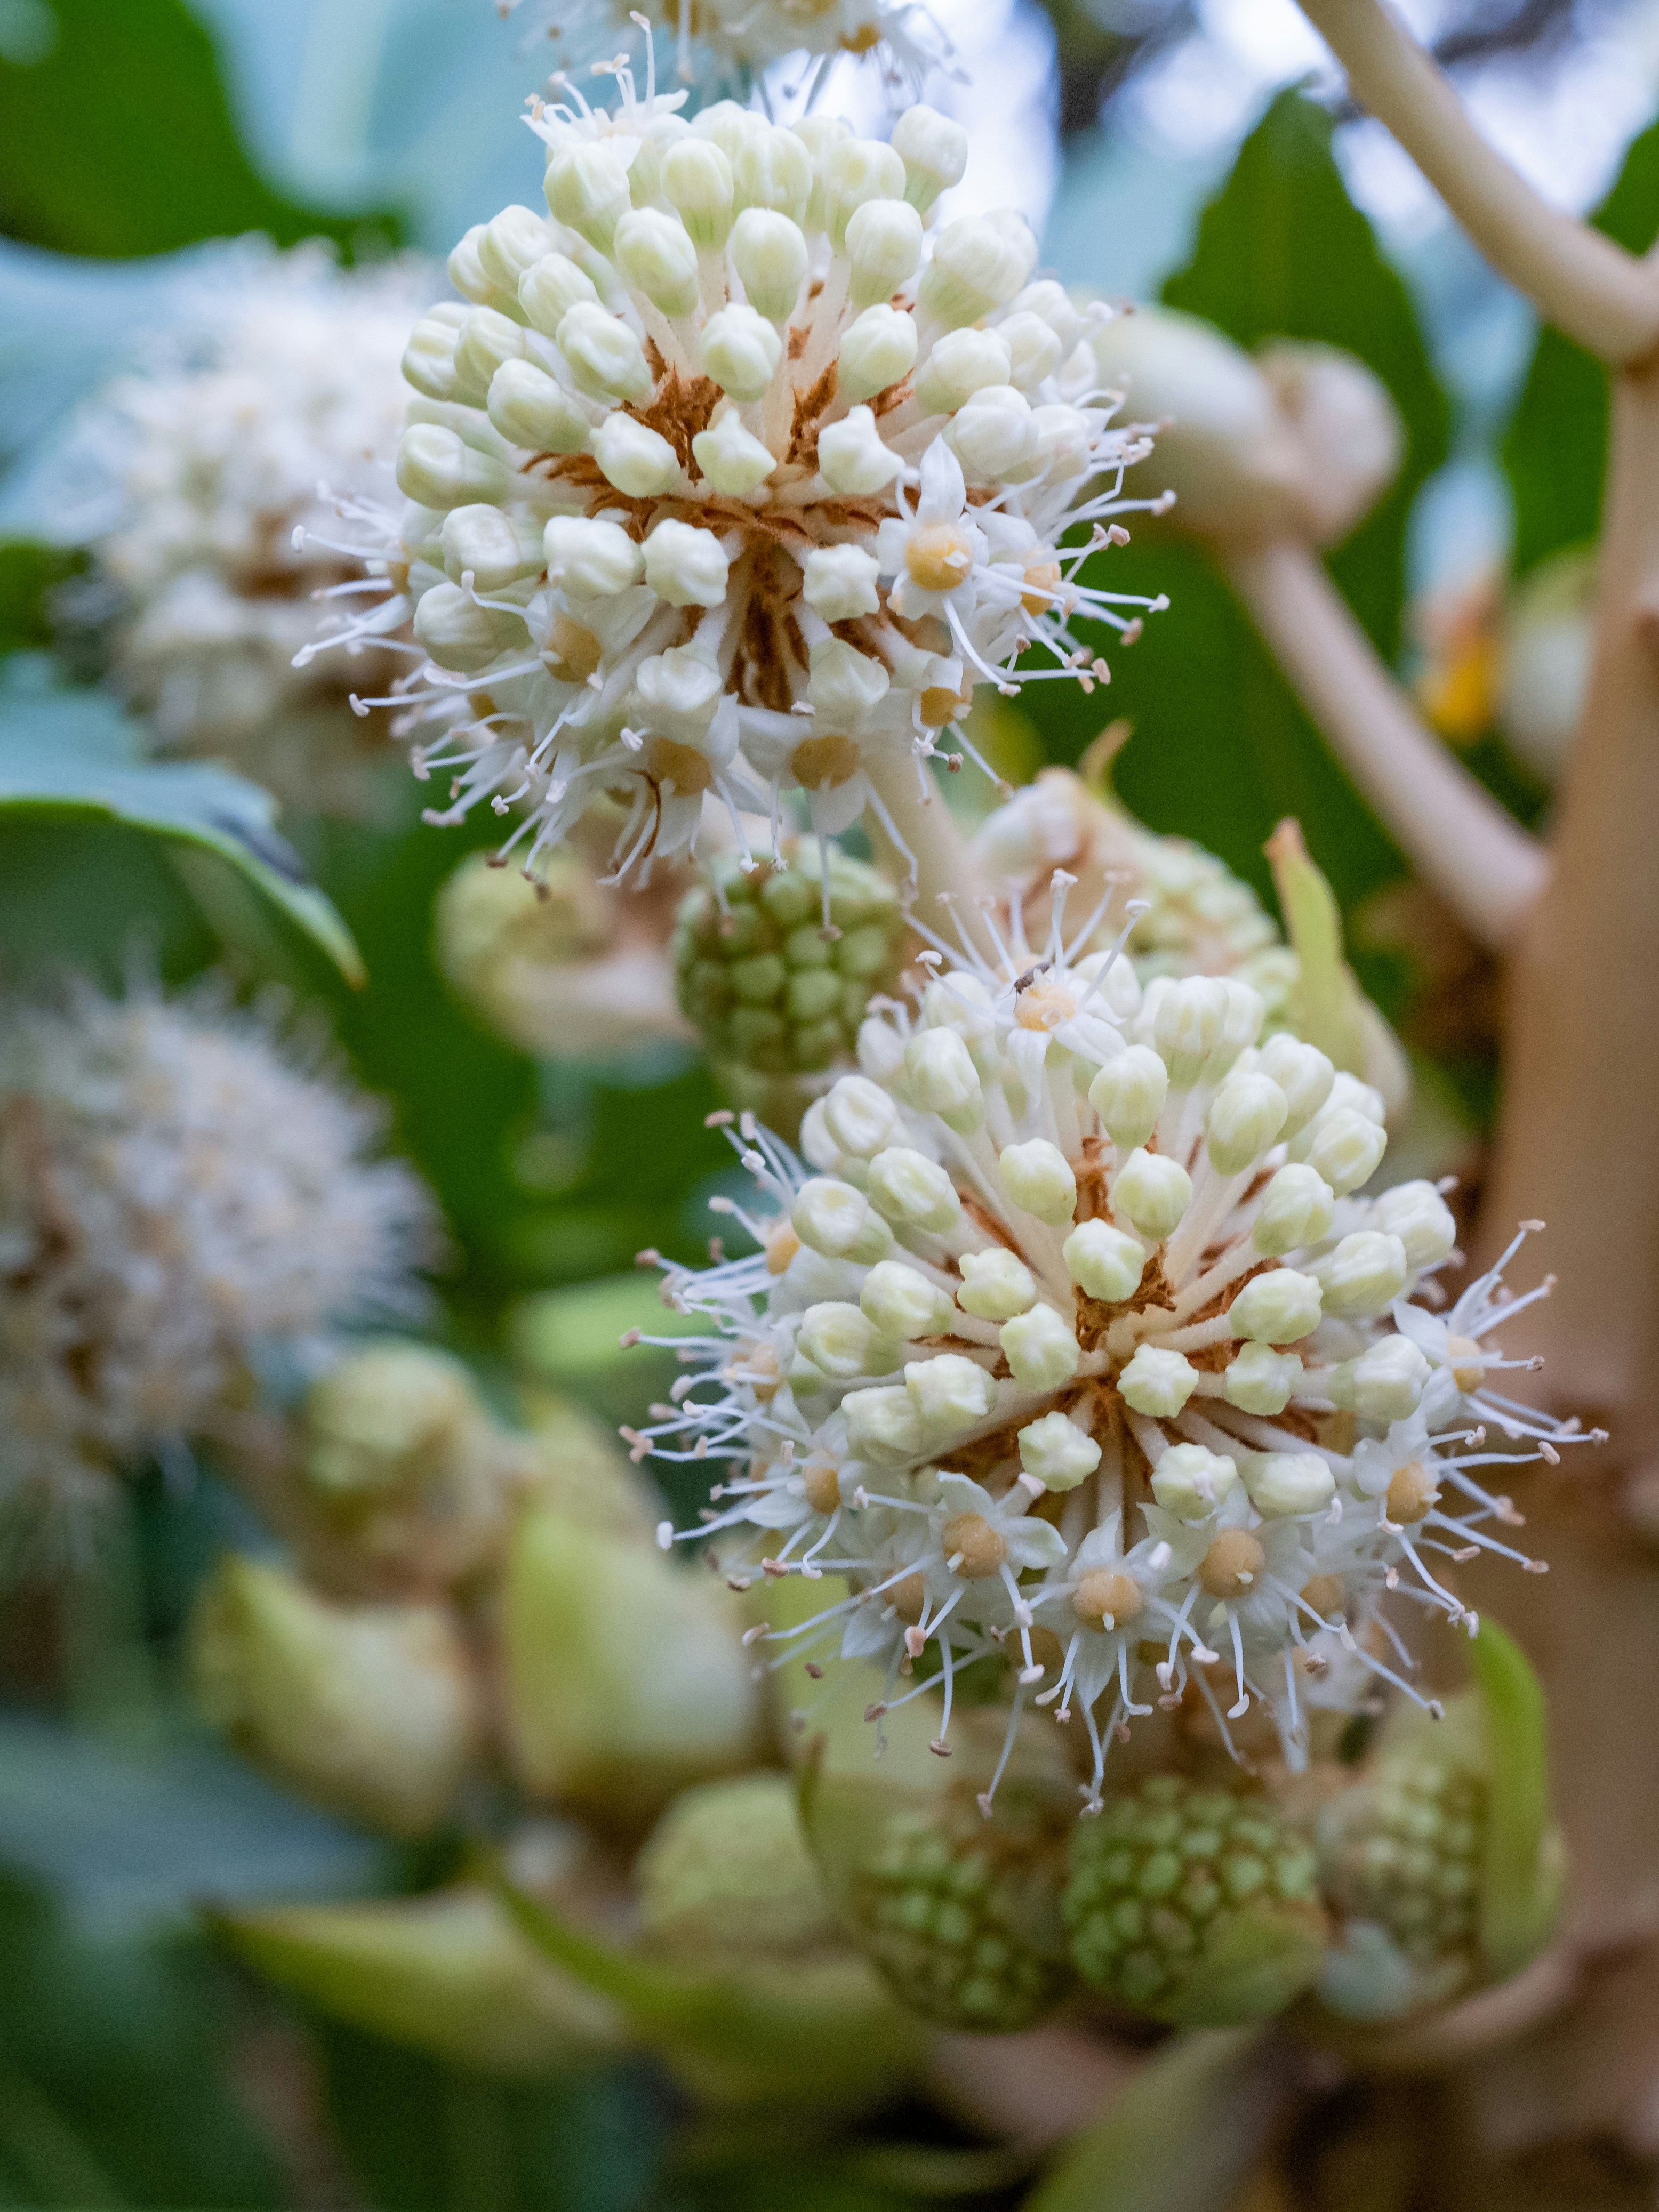 Image of Fatsia japonica flower close-up